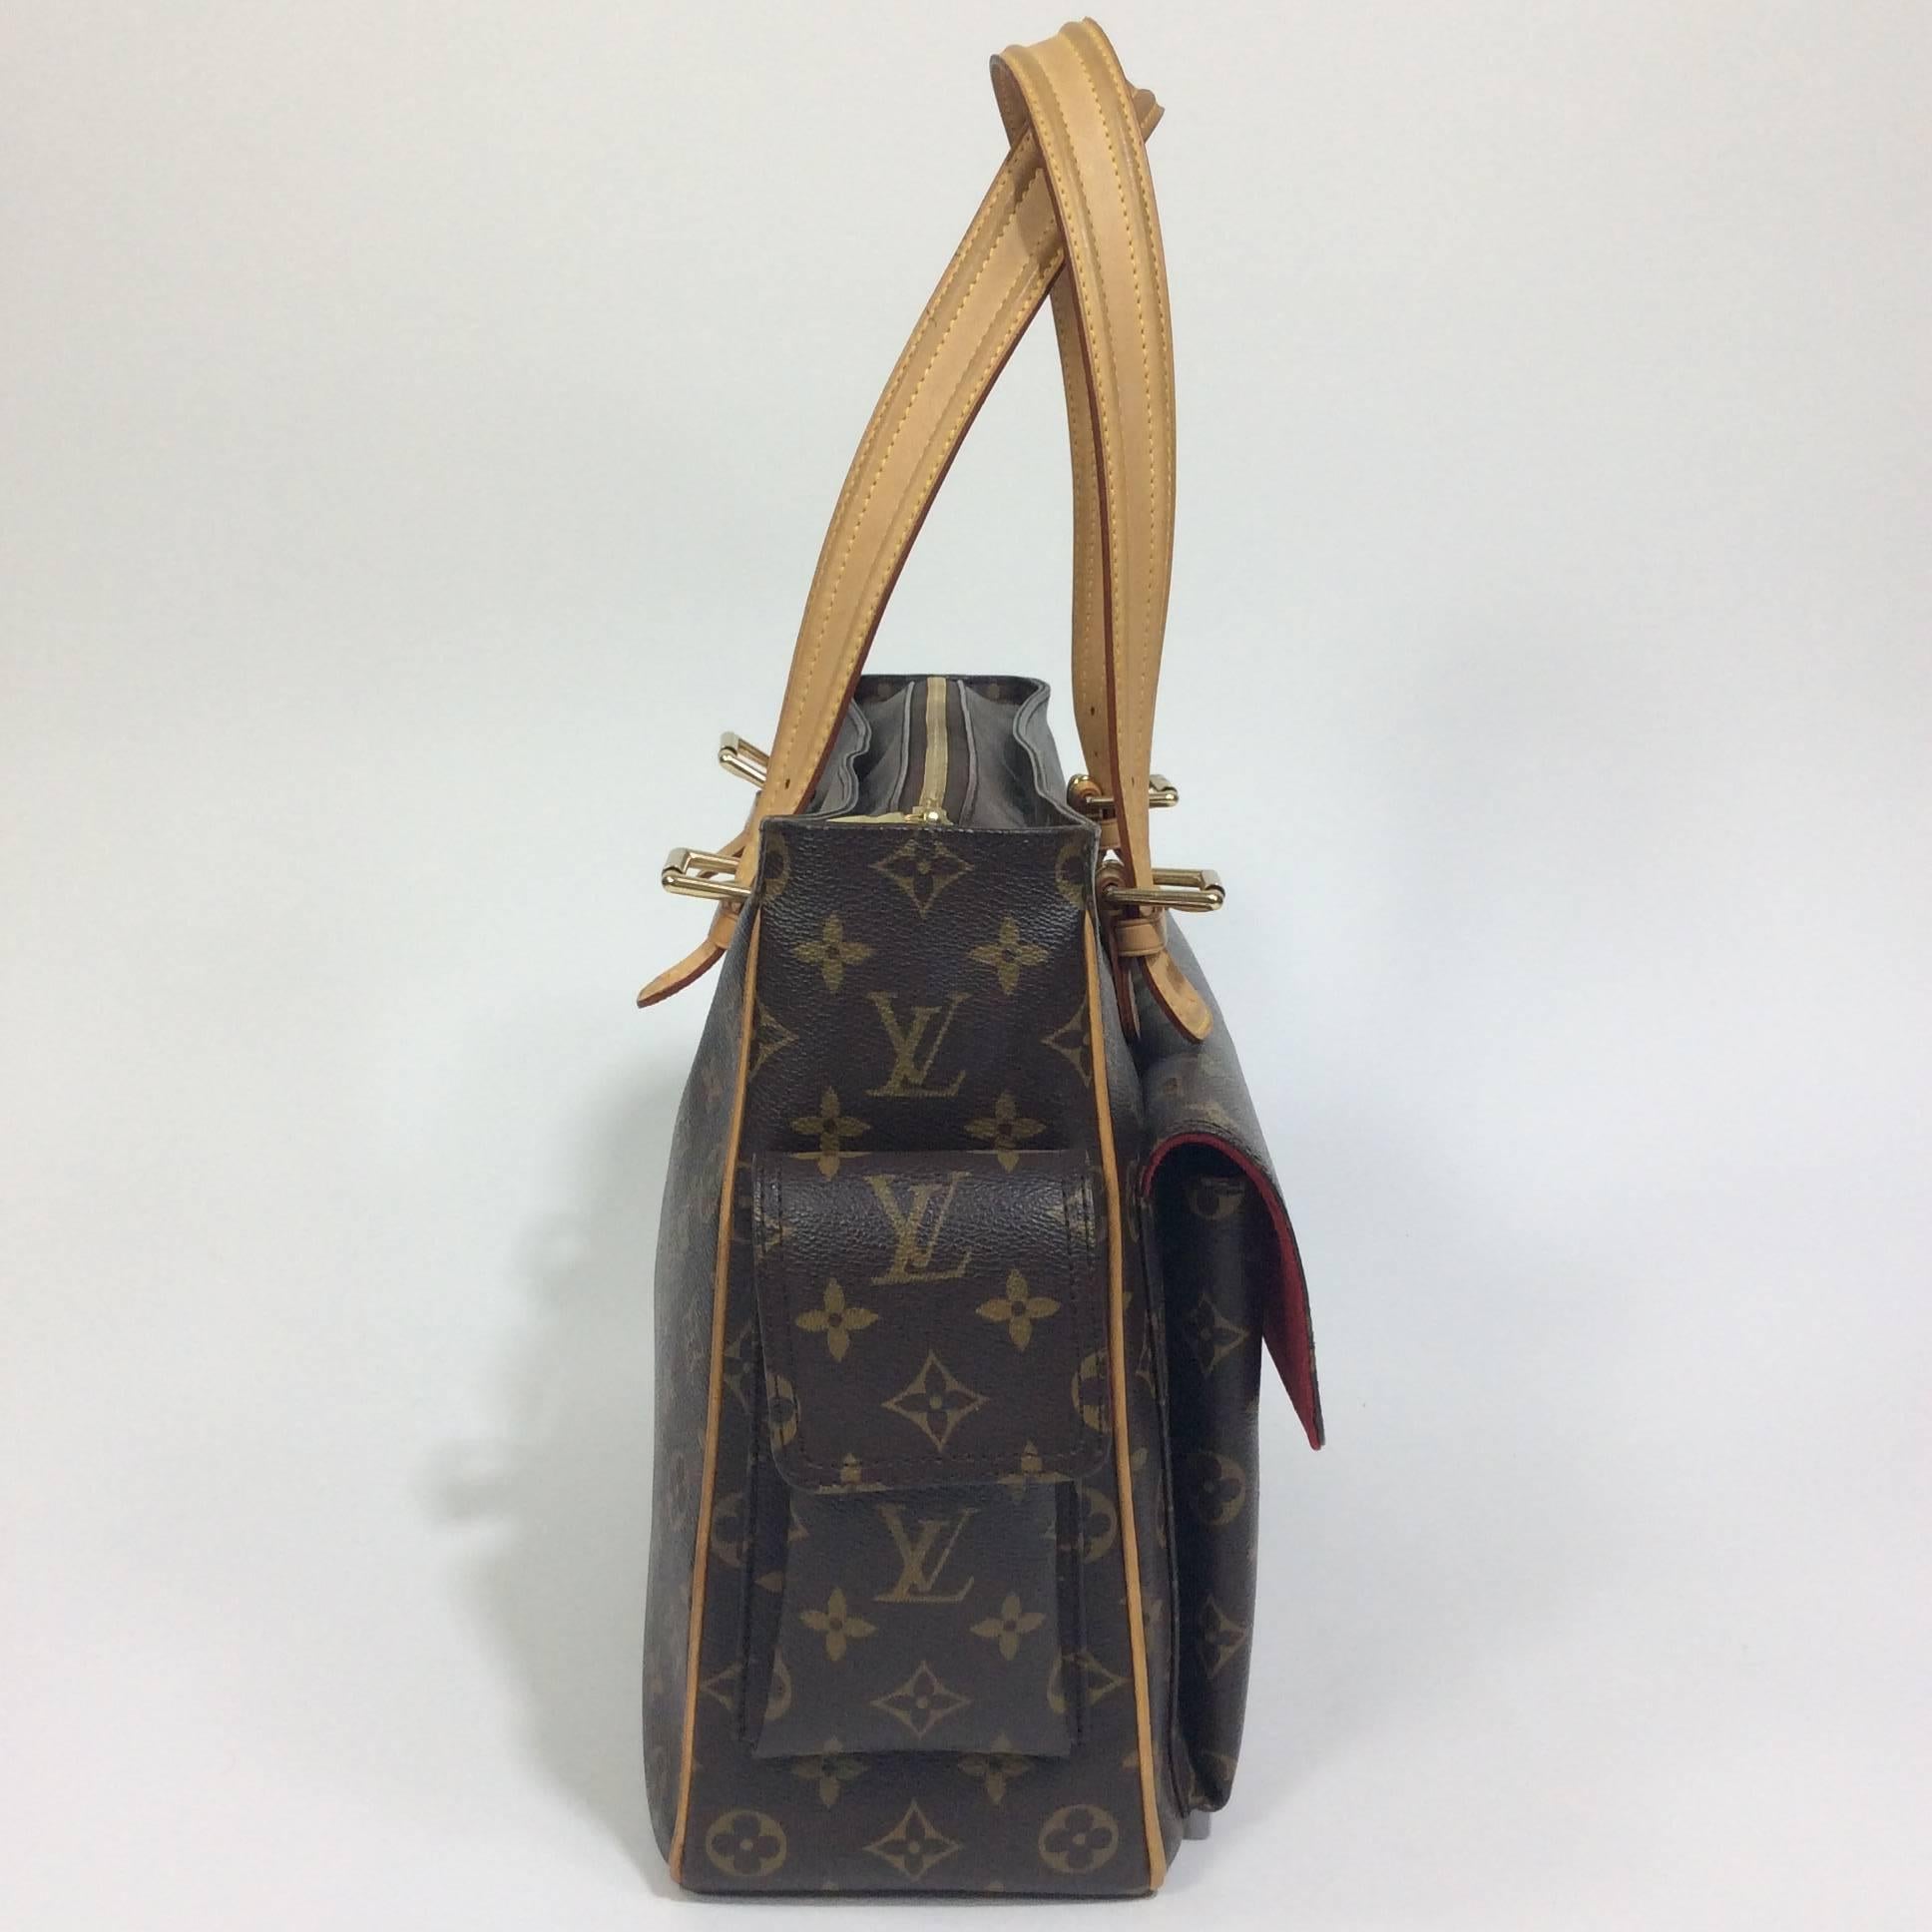 Louis Vuitton Shoulder Tote with Classic LV Monogram with light patina on straps and minimal wear on the interior as shown in images.